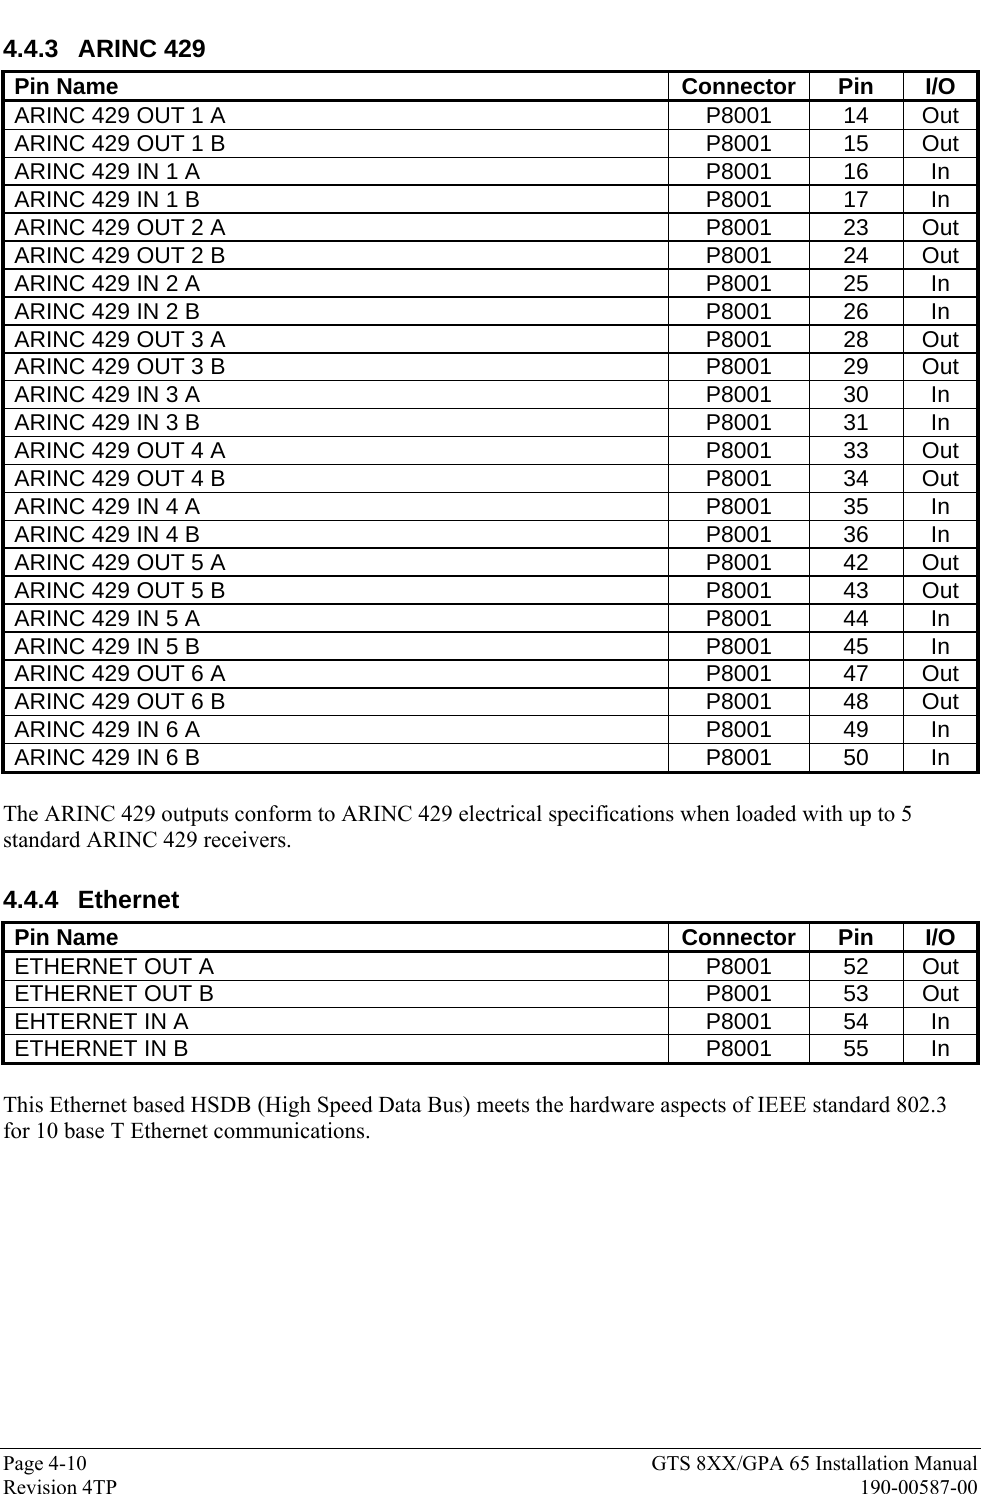  Page 4-10  GTS 8XX/GPA 65 Installation Manual Revision 4TP  190-00587-00 4.4.3 ARINC 429 Pin Name  Connector  Pin  I/O ARINC 429 OUT 1 A  P8001  14  Out ARINC 429 OUT 1 B  P8001  15  Out ARINC 429 IN 1 A  P8001  16  In ARINC 429 IN 1 B  P8001  17  In ARINC 429 OUT 2 A  P8001  23  Out ARINC 429 OUT 2 B  P8001  24  Out ARINC 429 IN 2 A  P8001  25  In ARINC 429 IN 2 B  P8001  26  In ARINC 429 OUT 3 A  P8001  28  Out ARINC 429 OUT 3 B  P8001  29  Out ARINC 429 IN 3 A  P8001  30  In ARINC 429 IN 3 B  P8001  31  In ARINC 429 OUT 4 A  P8001  33  Out ARINC 429 OUT 4 B  P8001  34  Out ARINC 429 IN 4 A  P8001  35  In ARINC 429 IN 4 B  P8001  36  In ARINC 429 OUT 5 A  P8001  42  Out ARINC 429 OUT 5 B  P8001  43  Out ARINC 429 IN 5 A  P8001  44  In ARINC 429 IN 5 B  P8001  45  In ARINC 429 OUT 6 A  P8001  47  Out ARINC 429 OUT 6 B  P8001  48  Out ARINC 429 IN 6 A  P8001  49  In ARINC 429 IN 6 B  P8001  50  In  The ARINC 429 outputs conform to ARINC 429 electrical specifications when loaded with up to 5 standard ARINC 429 receivers.  4.4.4 Ethernet Pin Name  Connector  Pin  I/O ETHERNET OUT A  P8001  52  Out ETHERNET OUT B  P8001  53  Out EHTERNET IN A  P8001  54  In ETHERNET IN B  P8001  55  In  This Ethernet based HSDB (High Speed Data Bus) meets the hardware aspects of IEEE standard 802.3 for 10 base T Ethernet communications. 